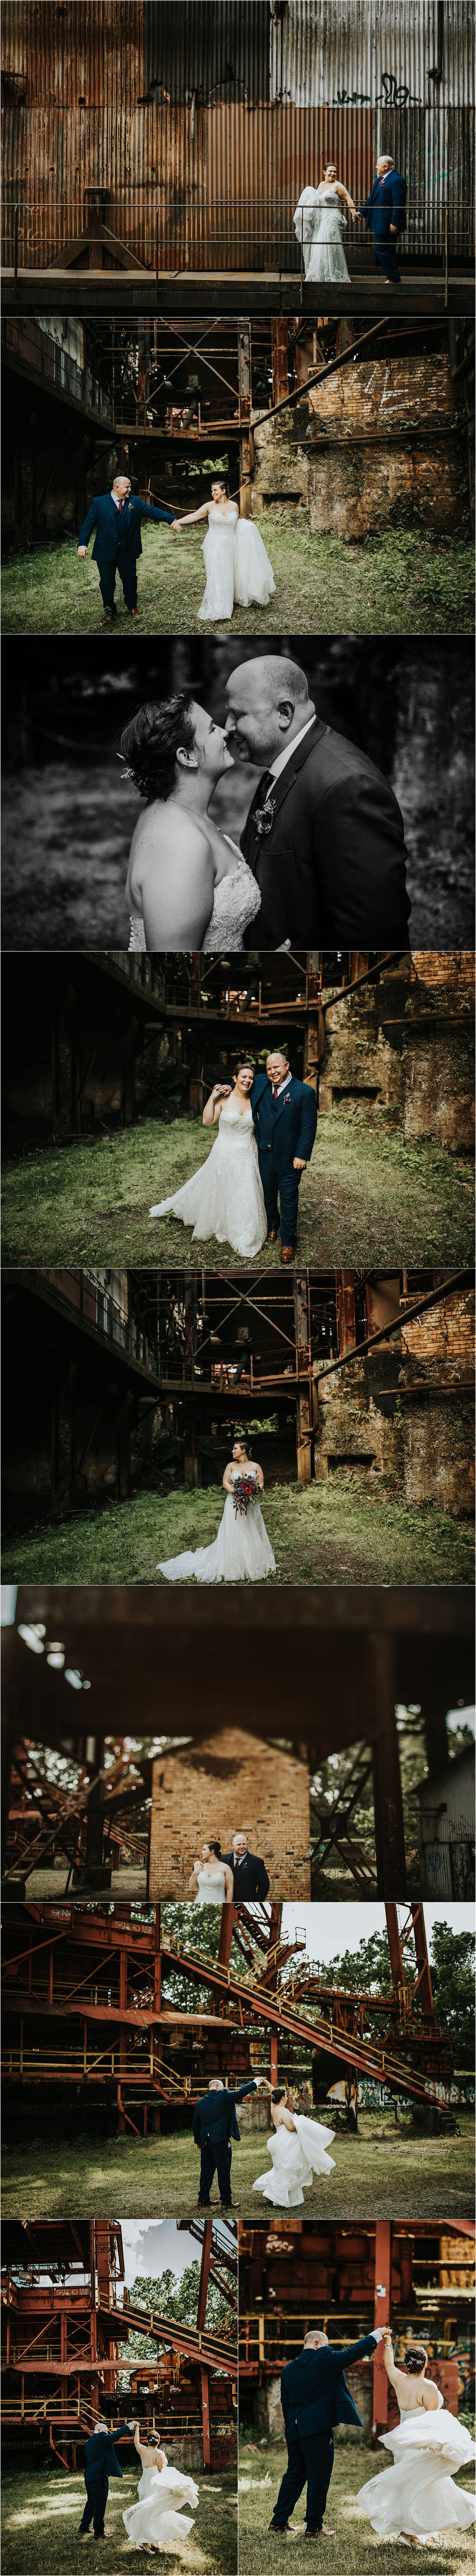 04 carrie furnace wedding venue pictures.jpg